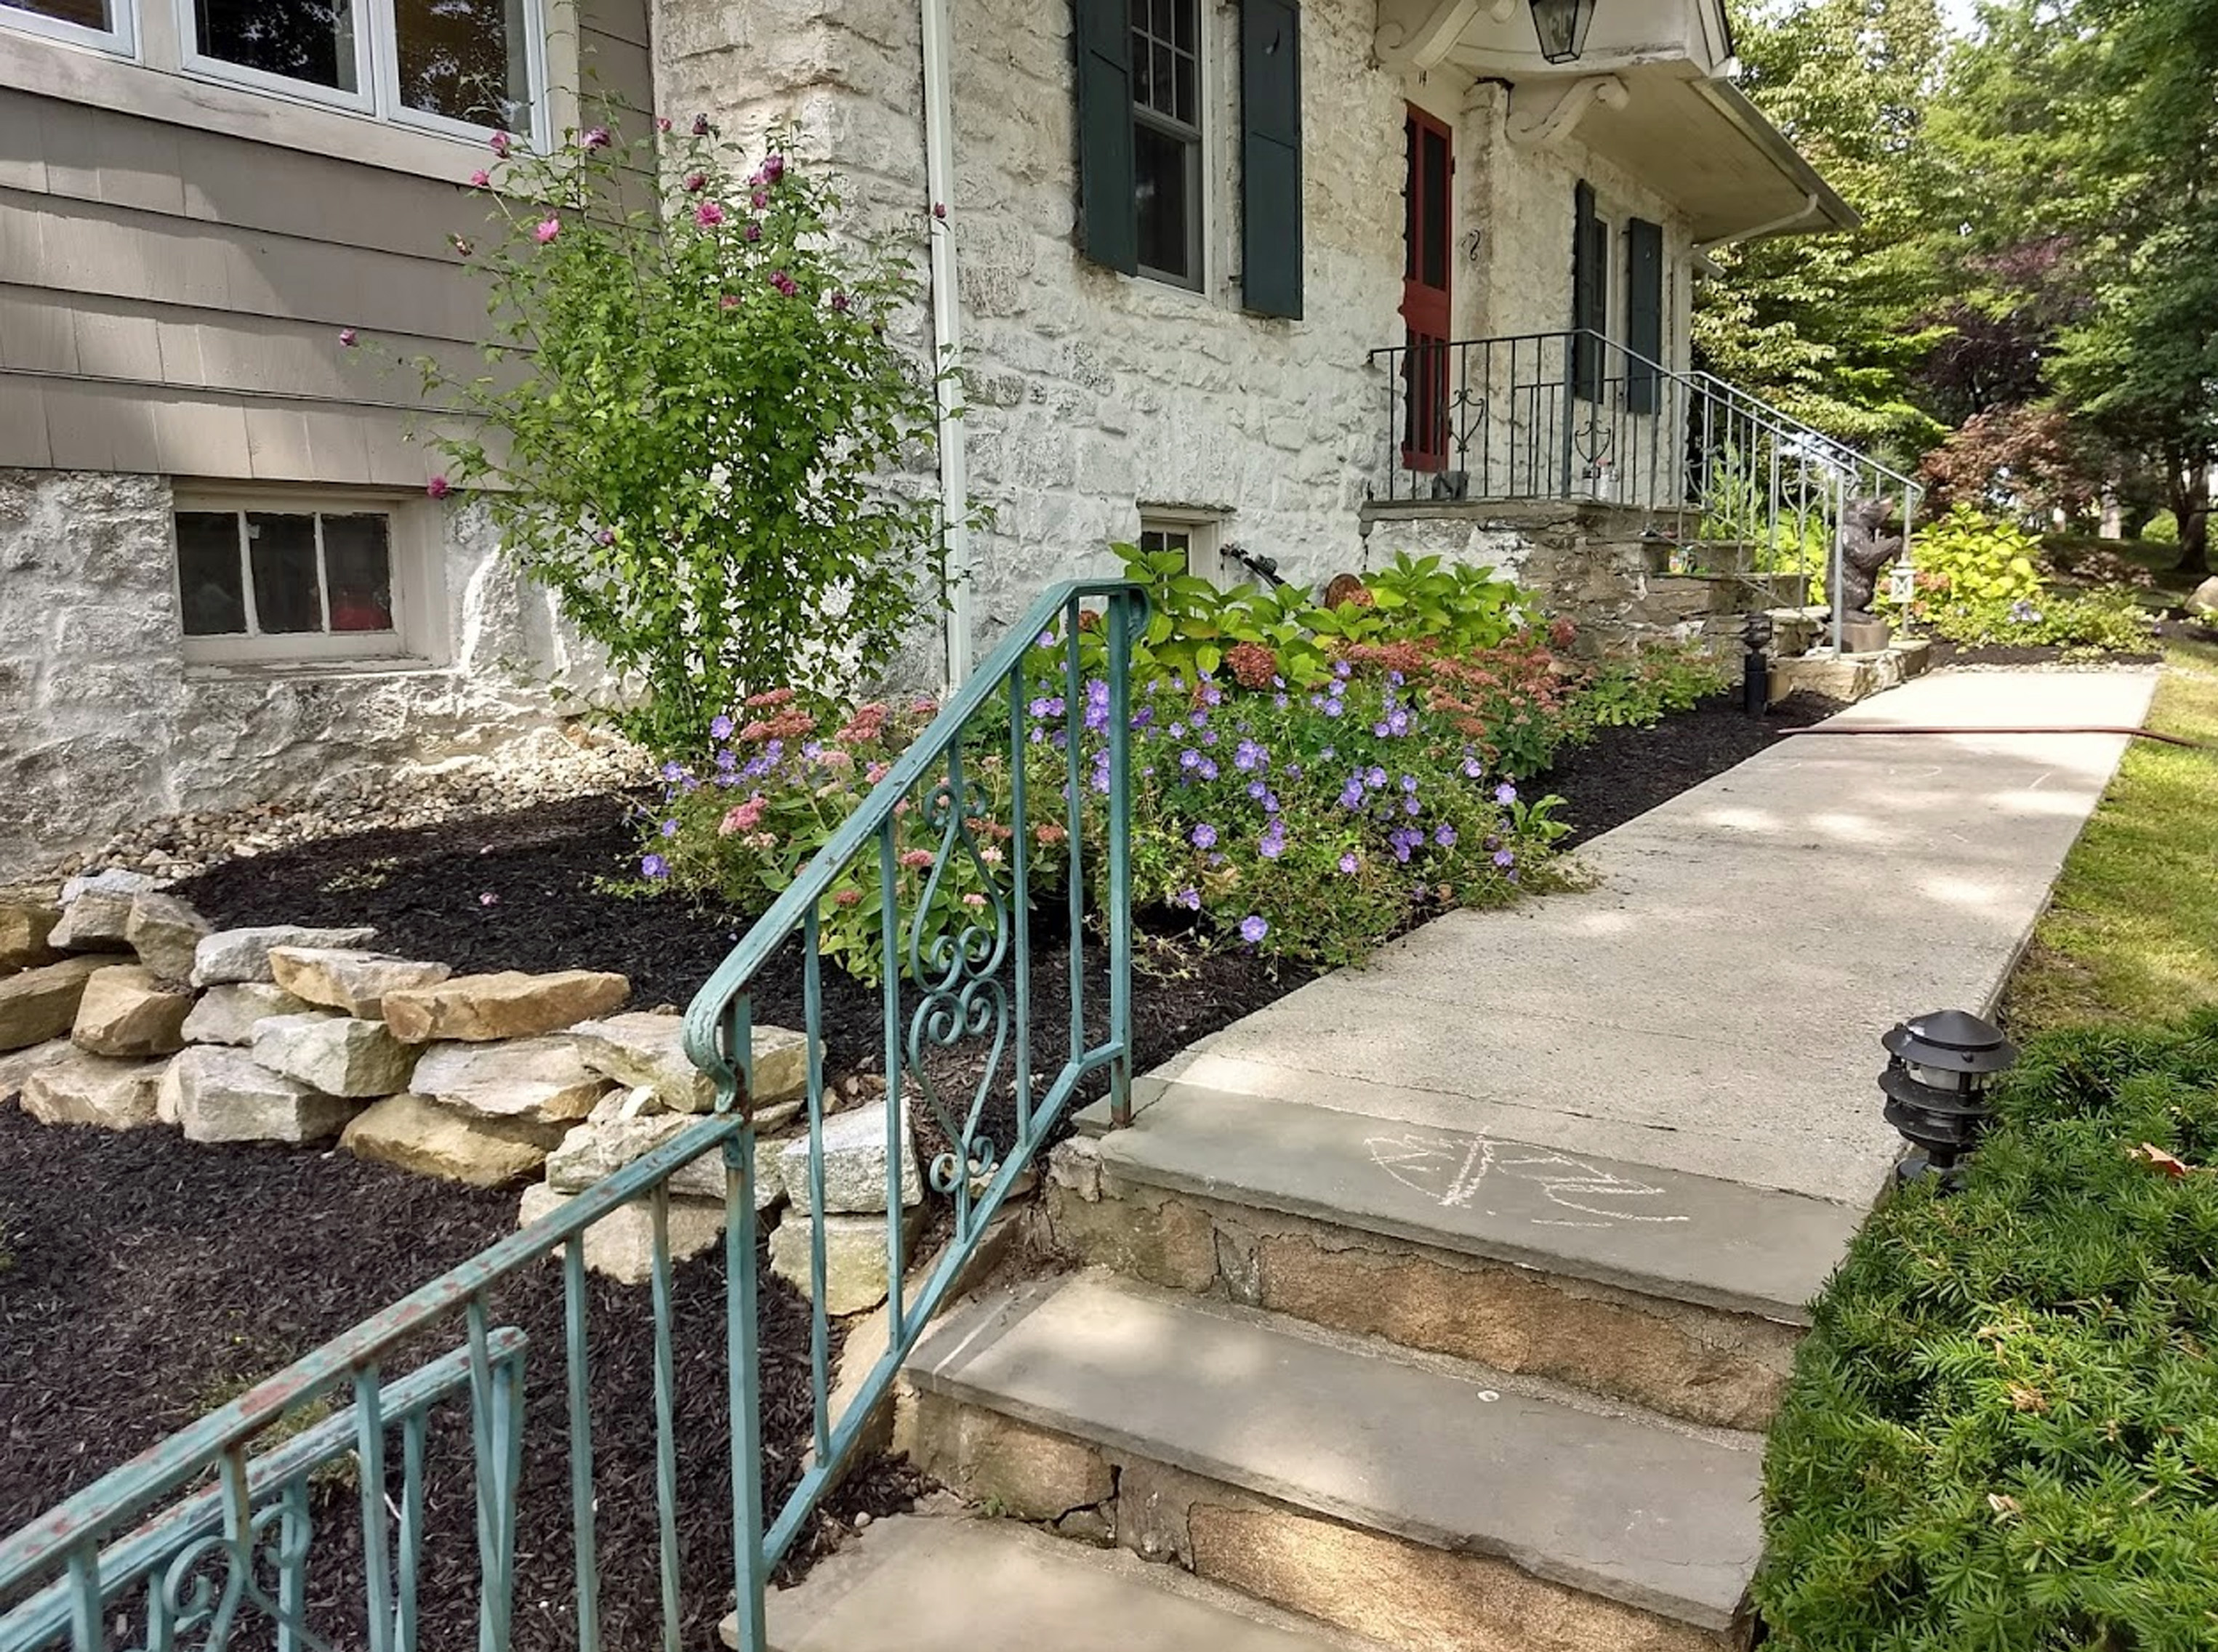 Thumbnail of completed plant bed, along the walkway, with mulch, and stone